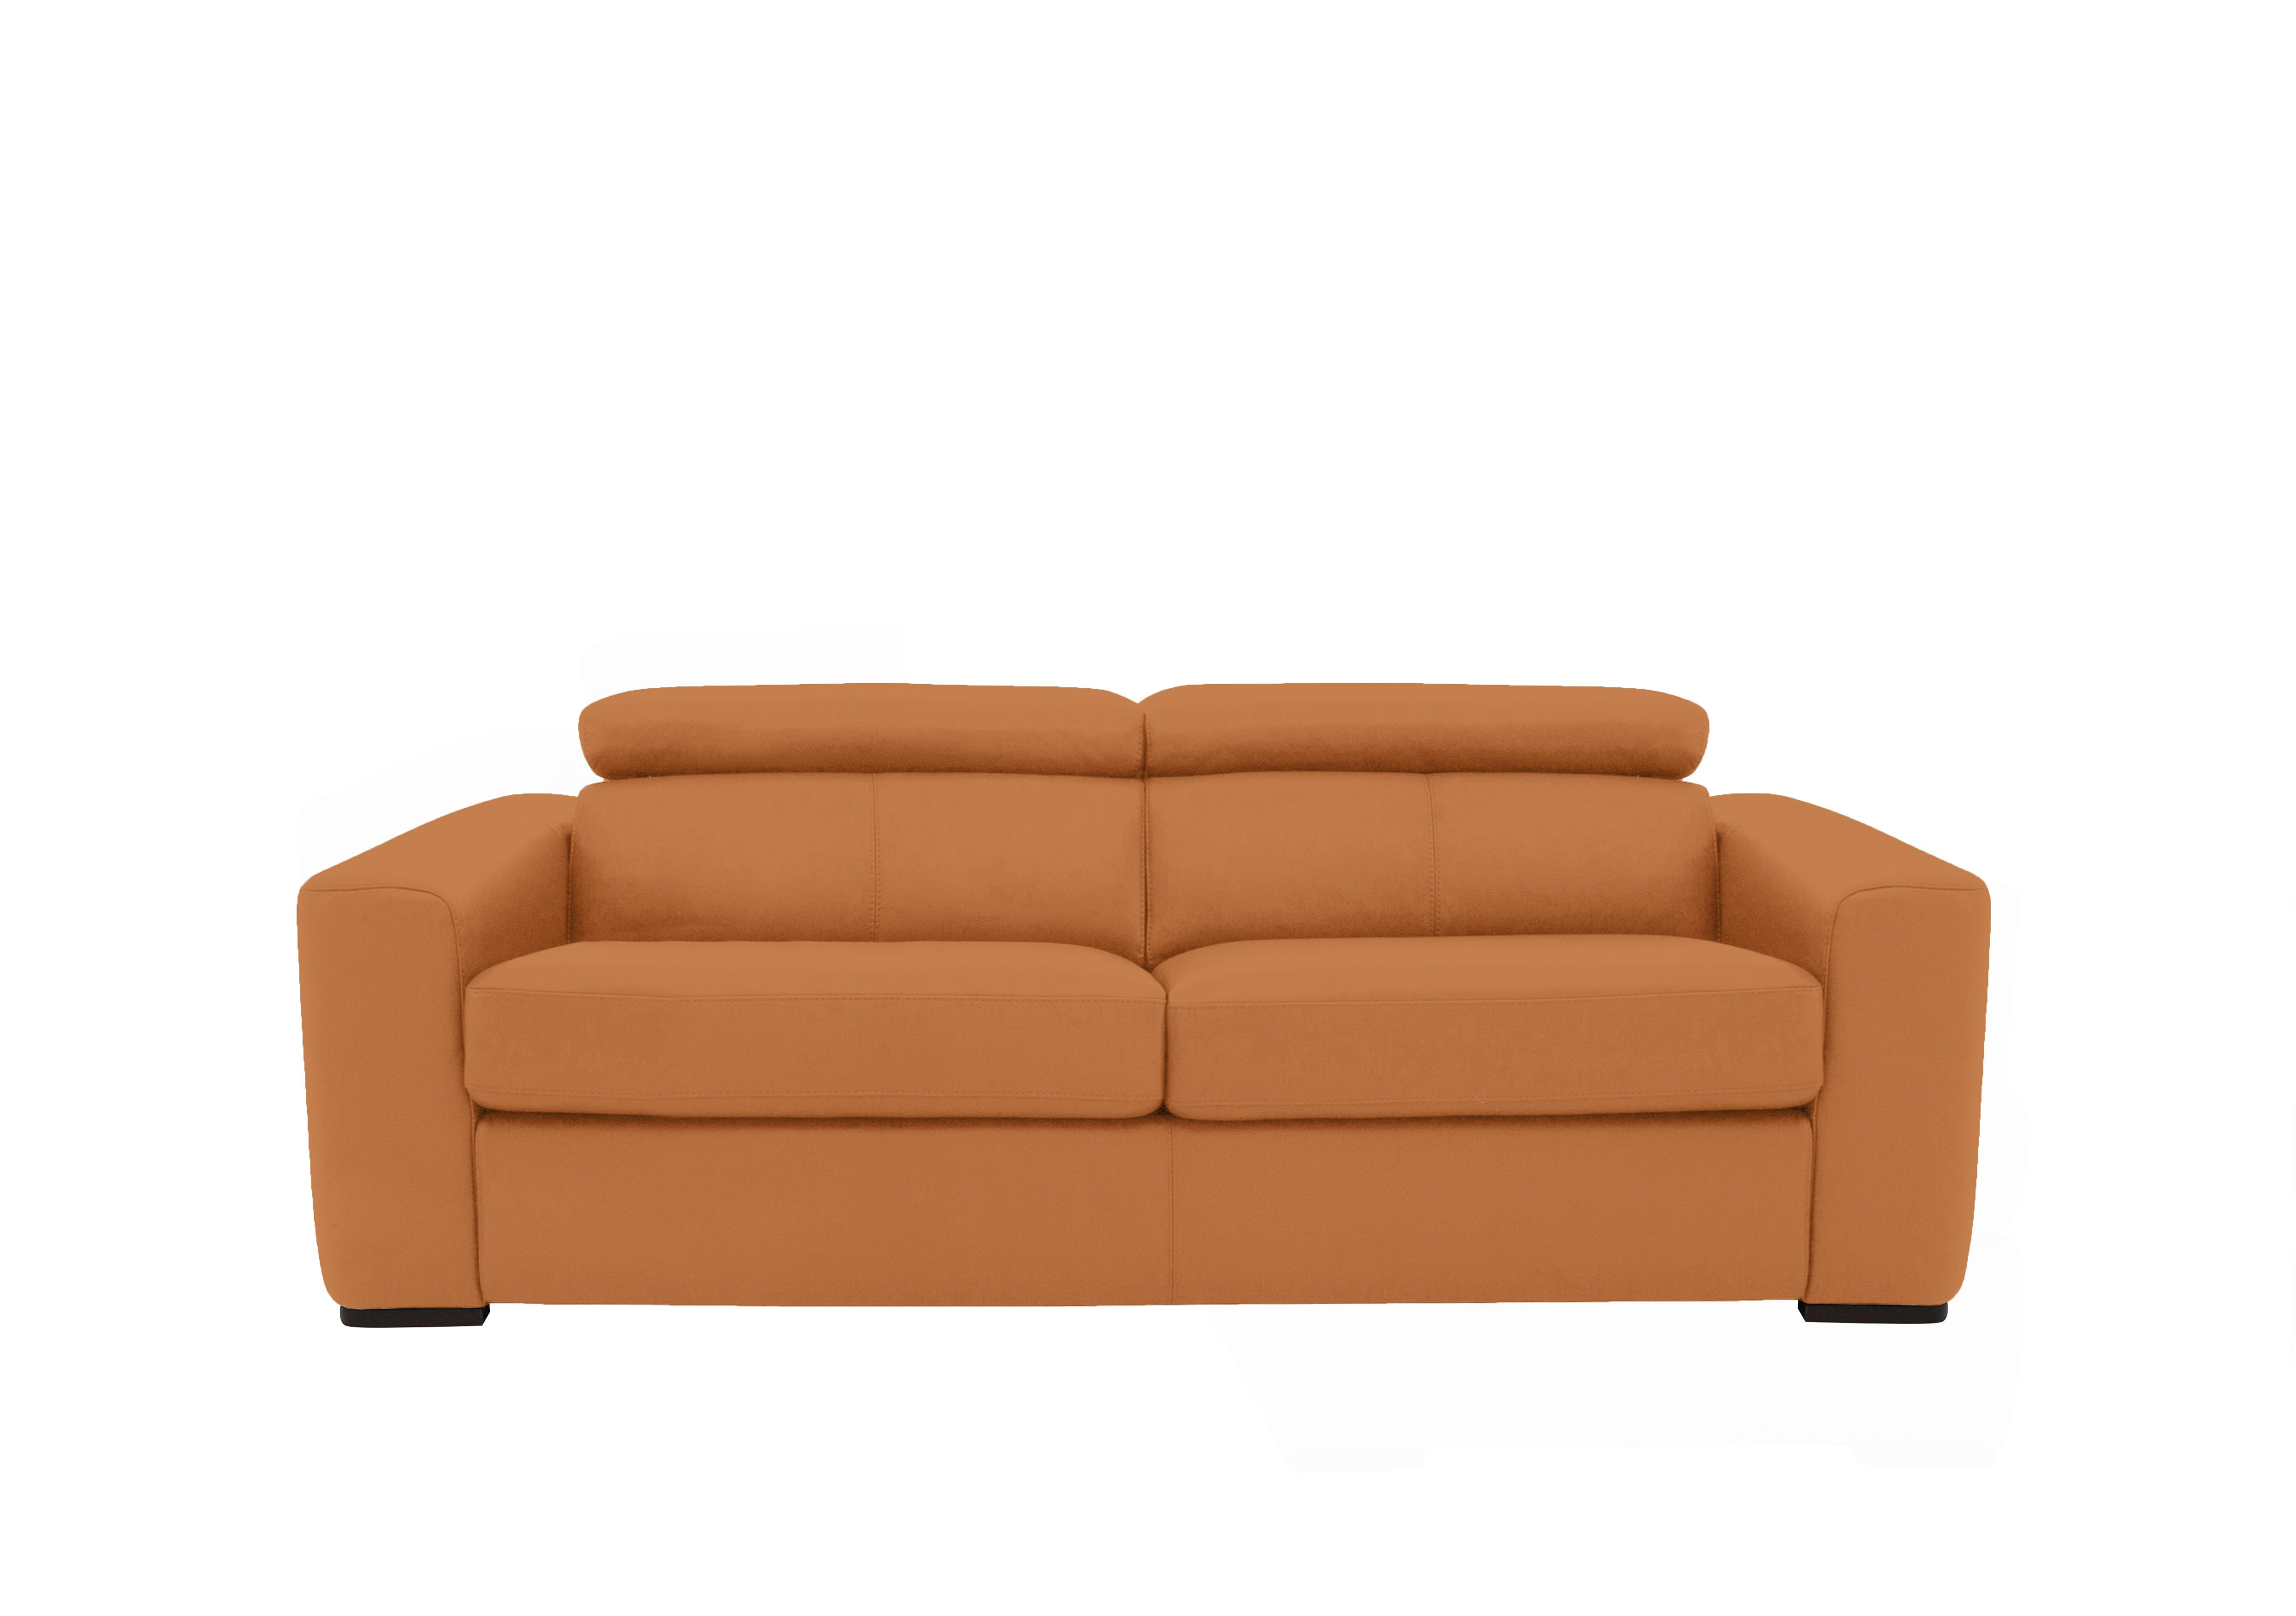 Infinity 3 Seater Leather Sofa in Bv-335e Honey Yellow on Furniture Village